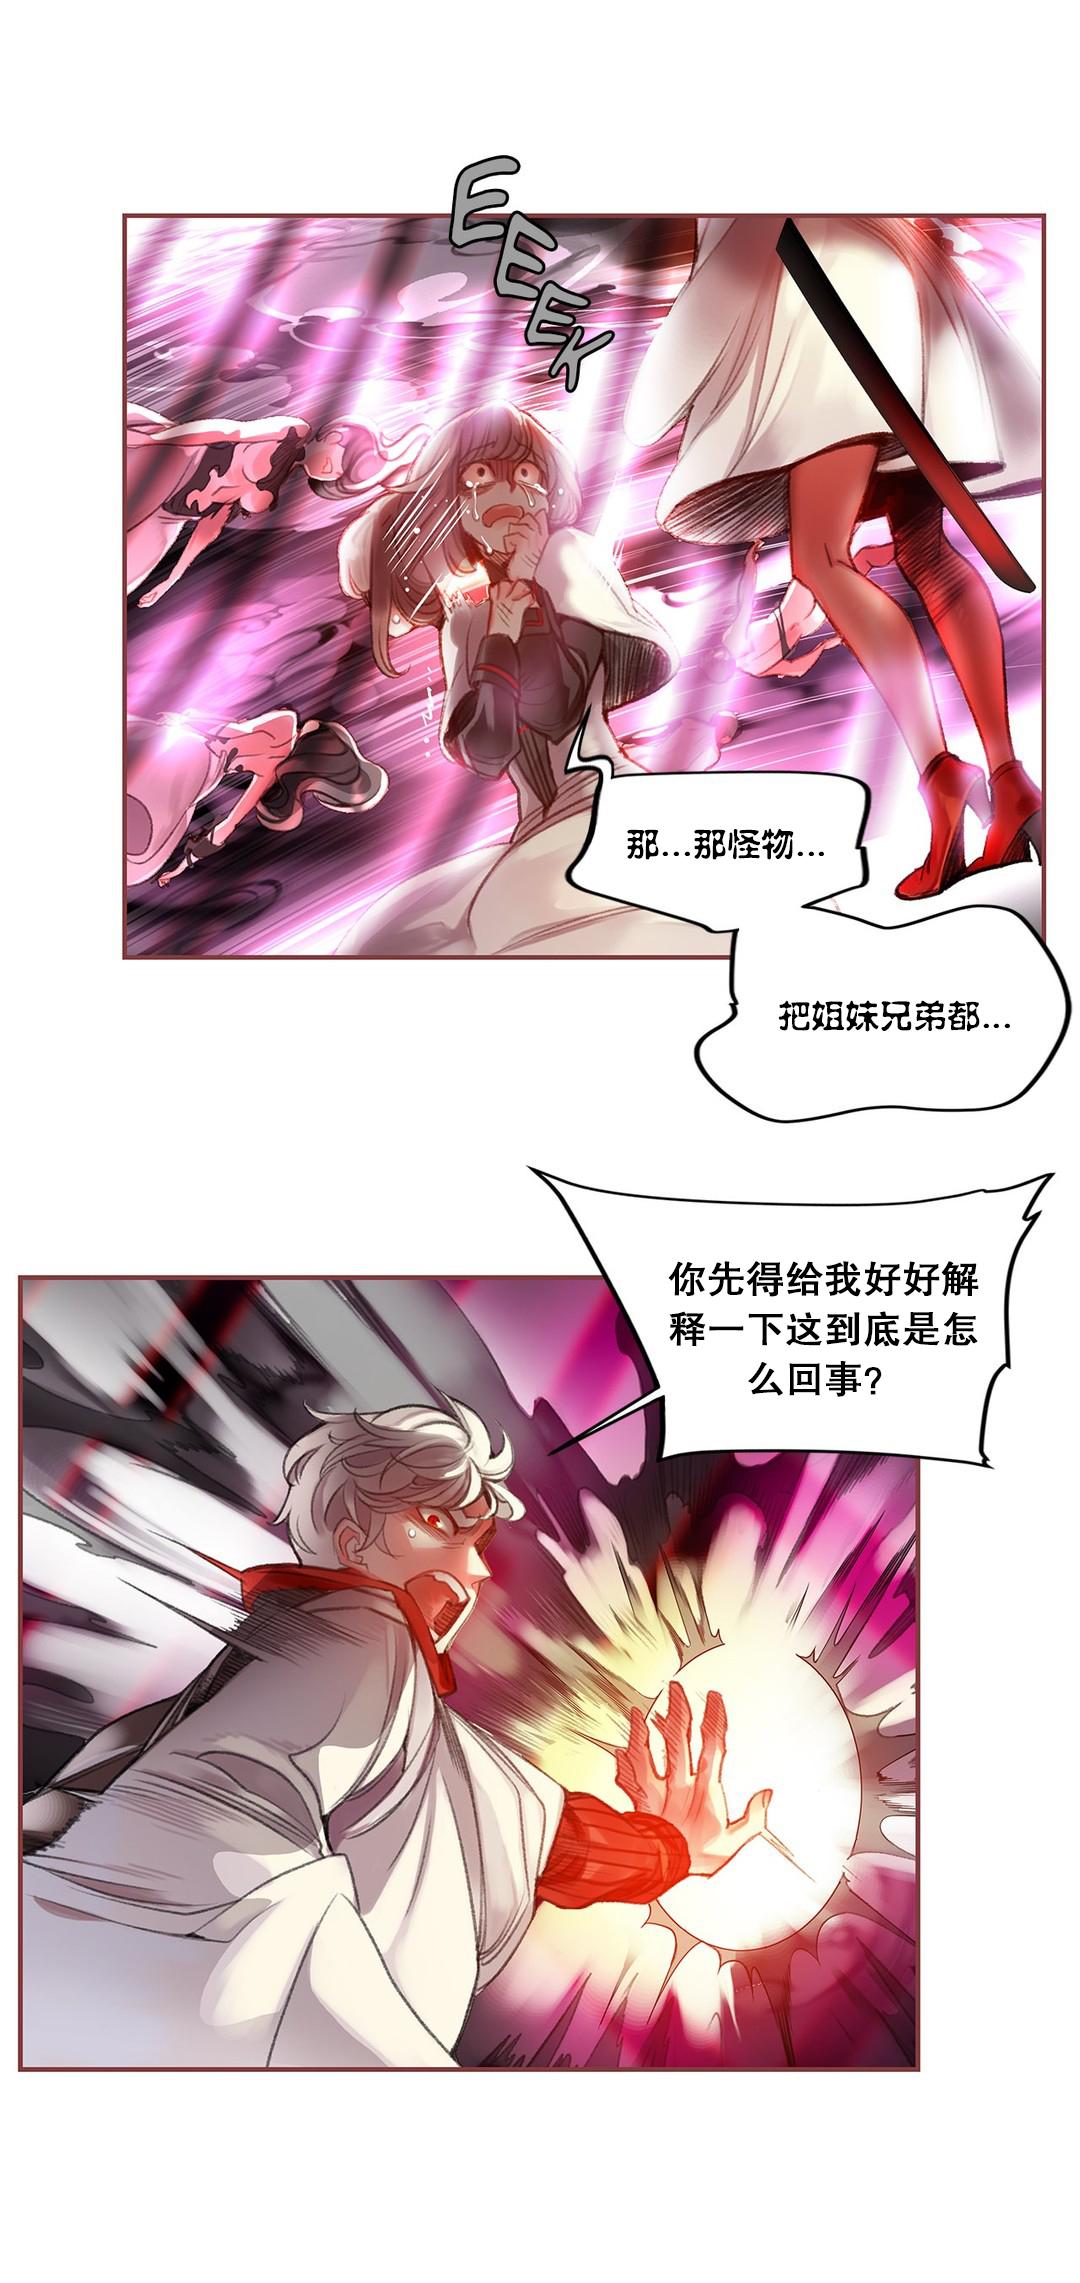 [Juder] Lilith`s Cord (第二季) Ch.61-62 [Chinese] [aaatwist个人汉化] [Ongoing] 22